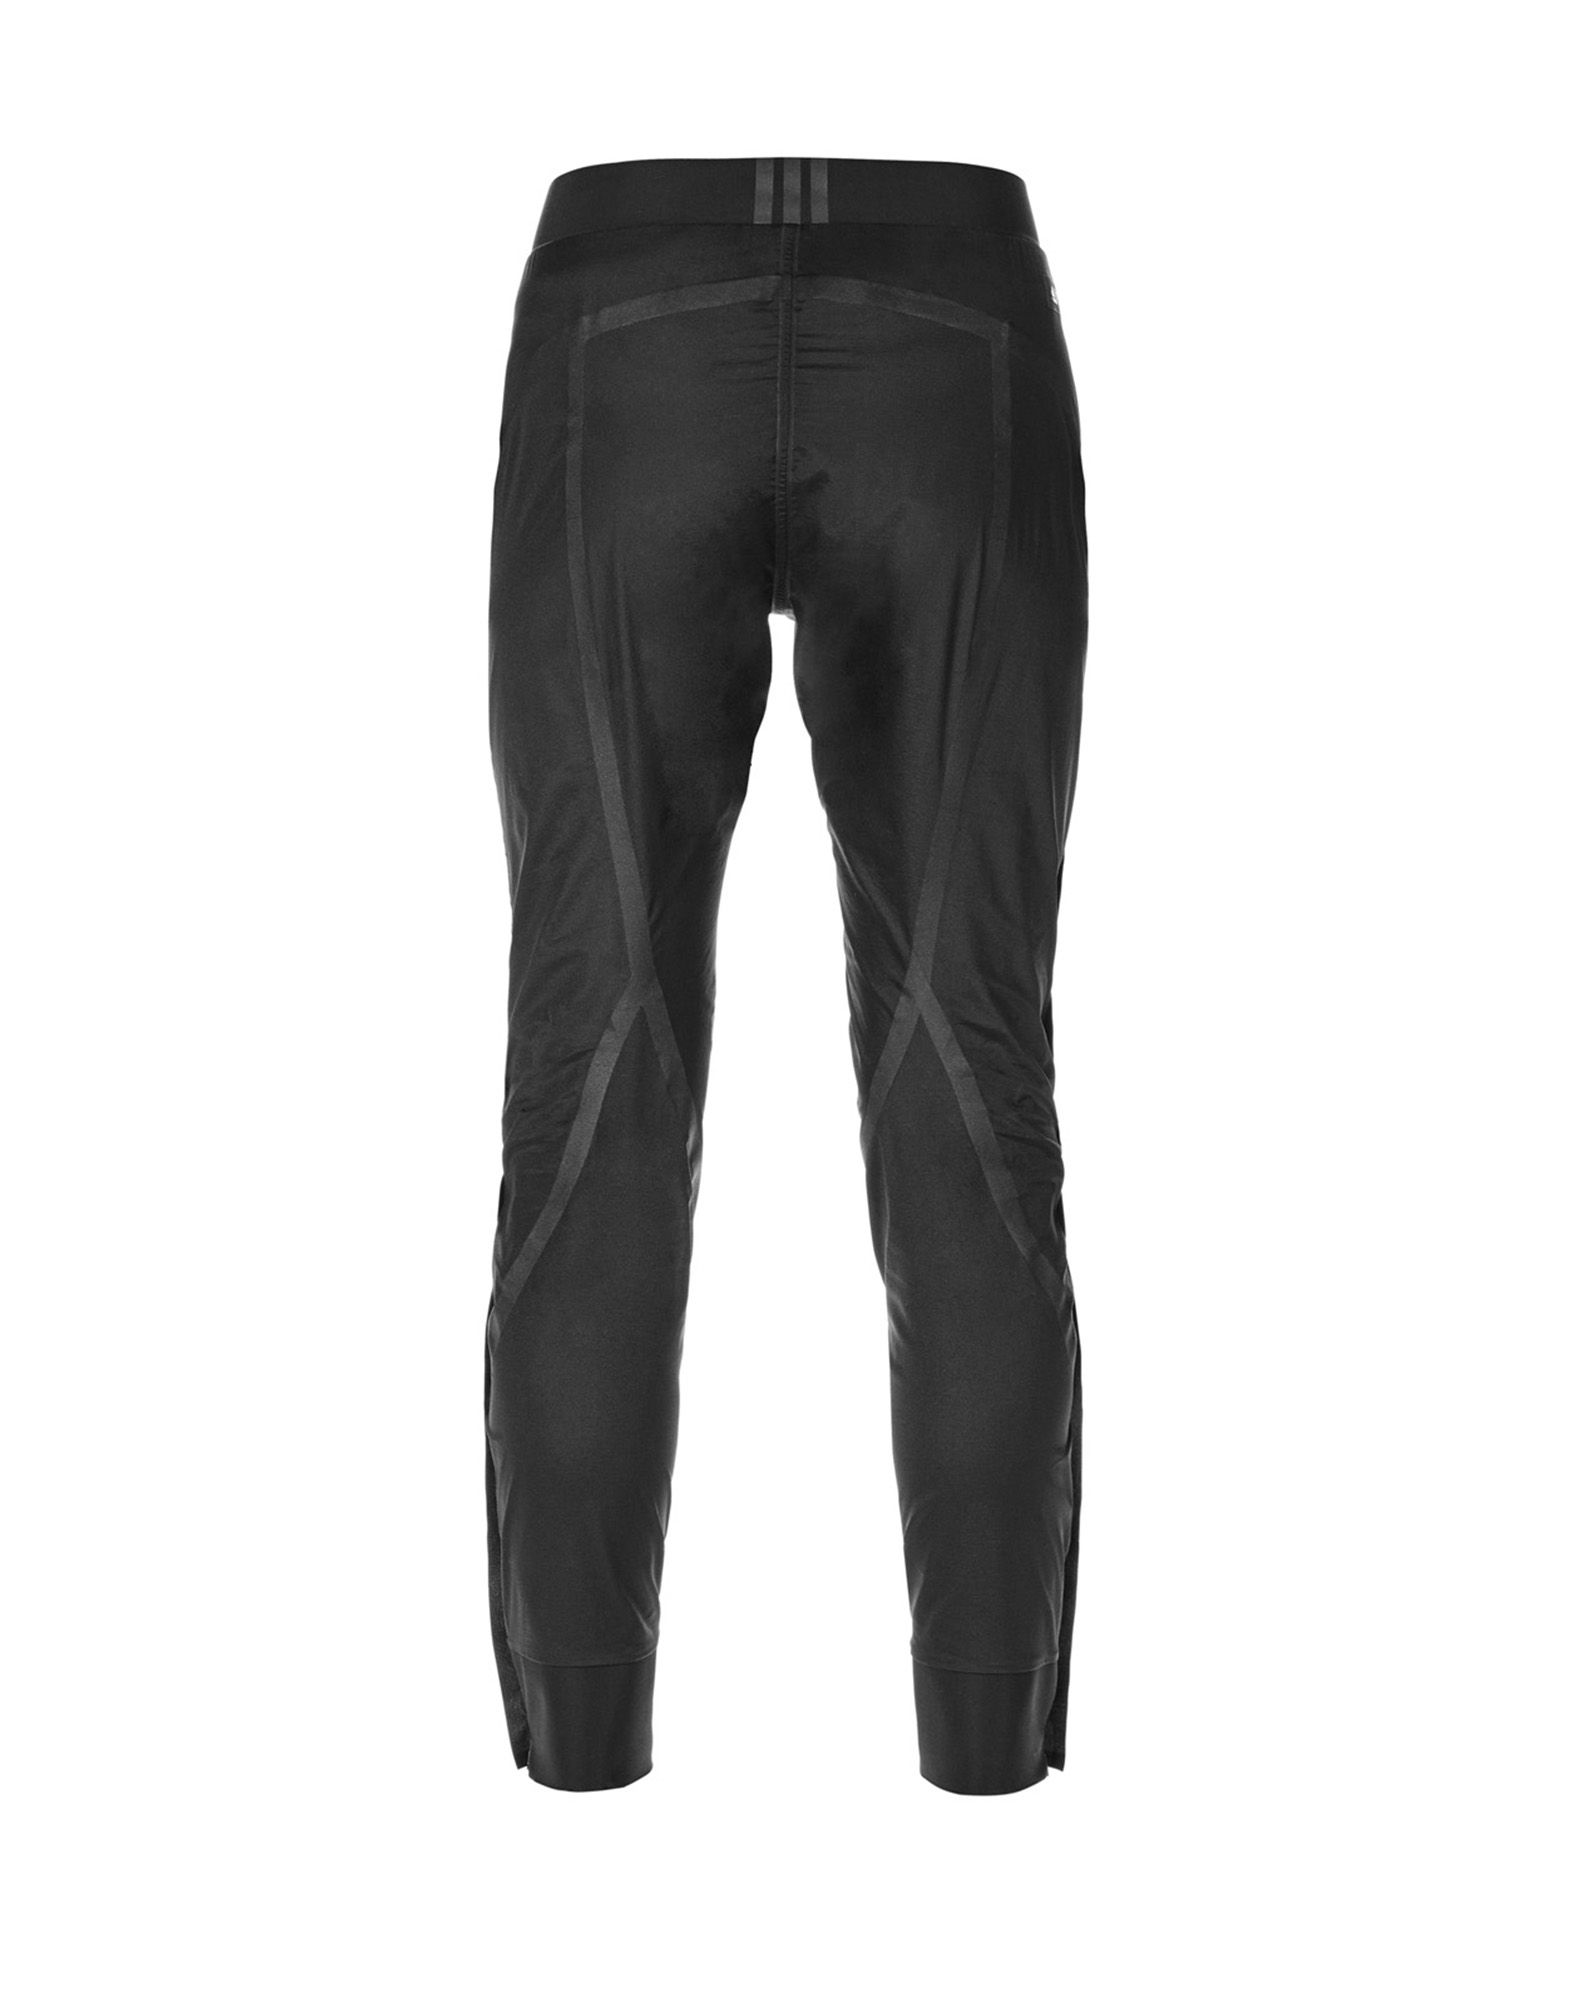 Y 3 SPORT LITE PANT for Women | Adidas Y-3 Official Store